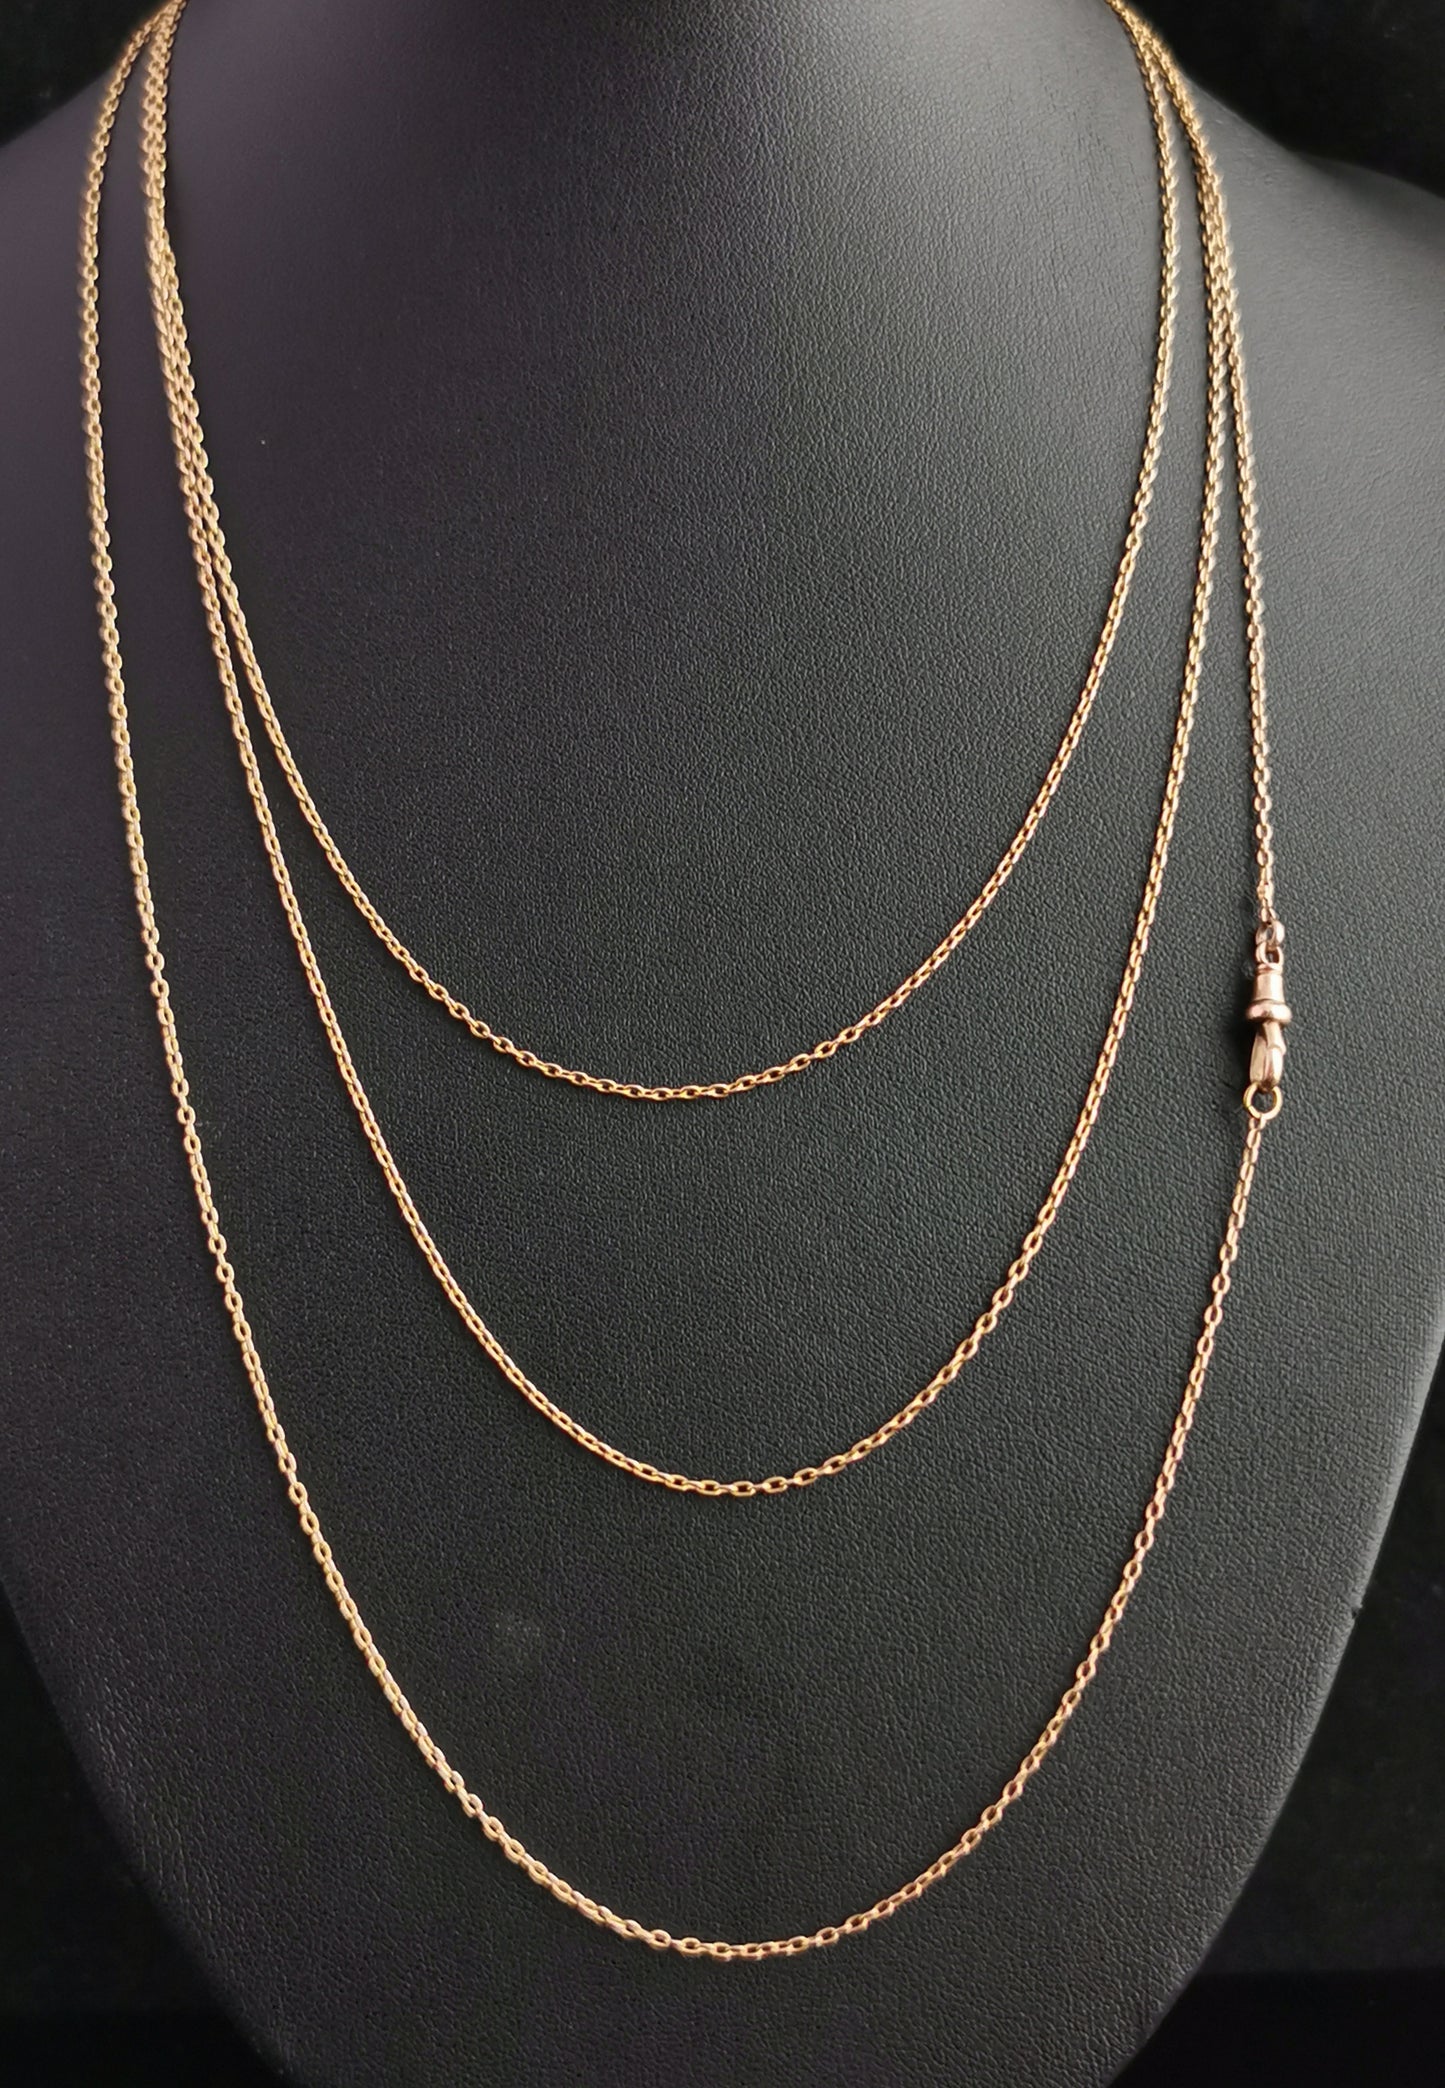 Antique 15ct yellow gold longuard chain necklace, Victorian, trace link